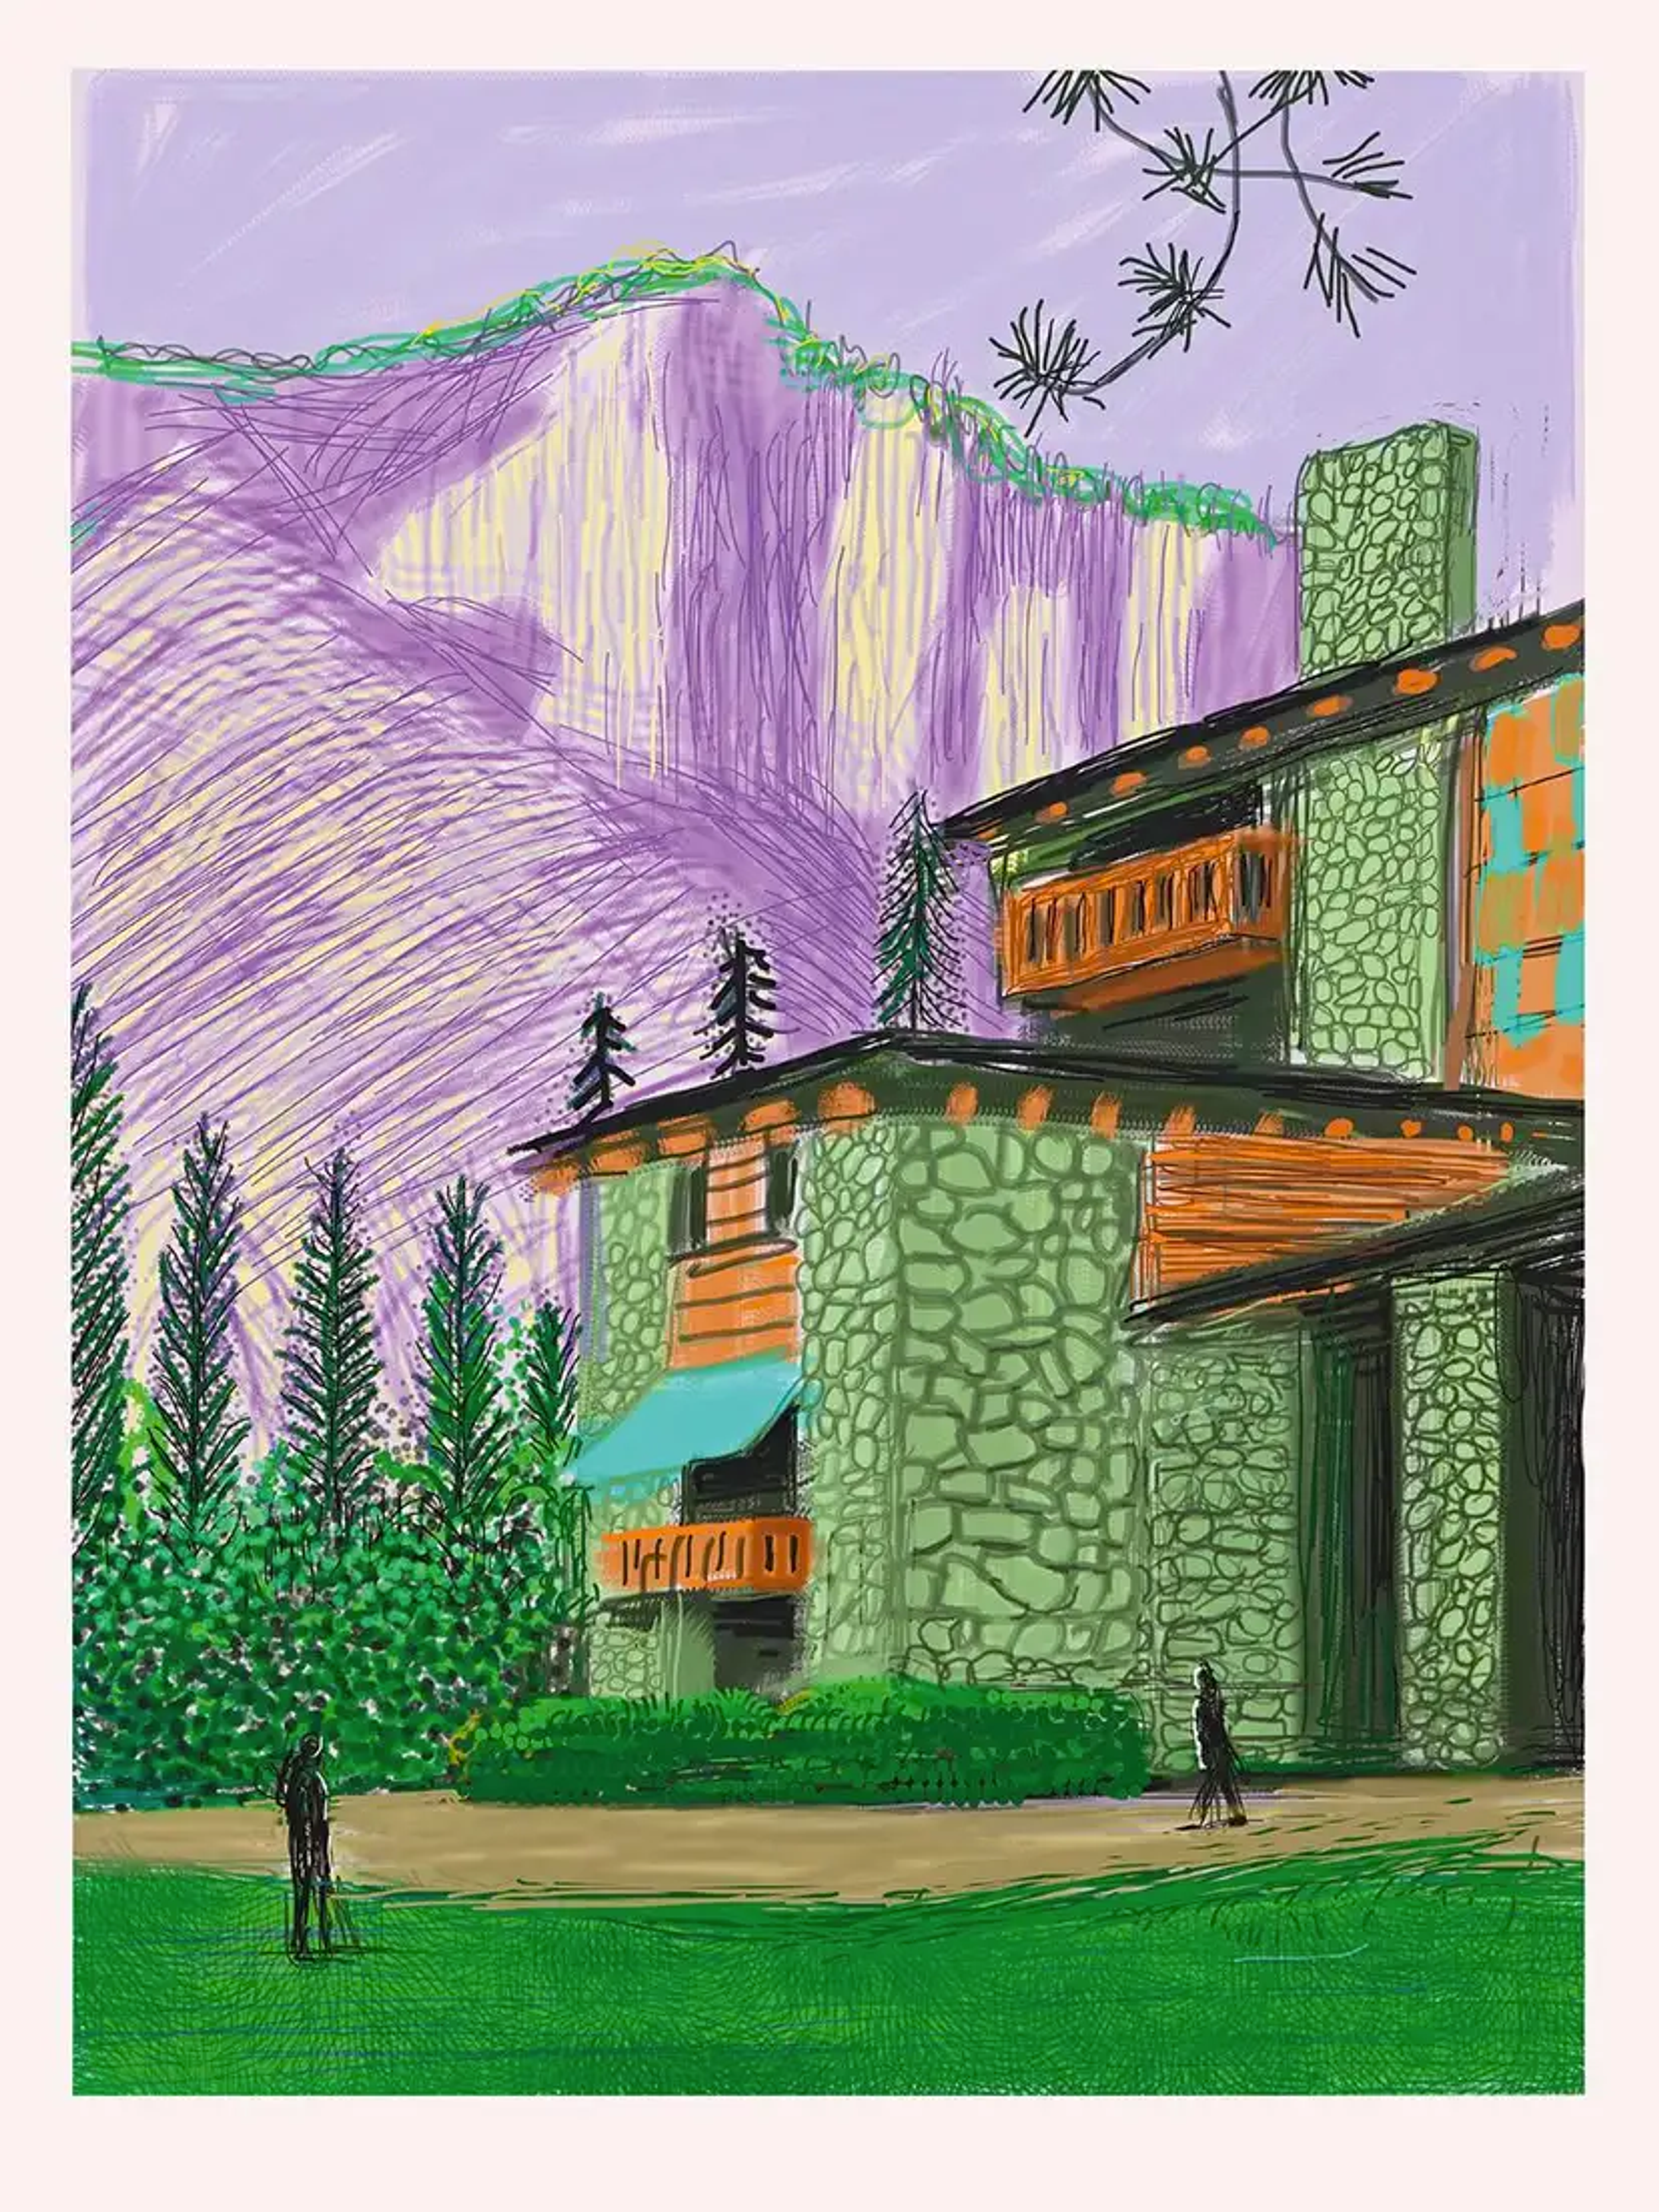 A view of the Ahwahnee Hotel in Yosemite by David Hockney. It shows its stone and wood facade in green, with a large purple mountain in the distance.